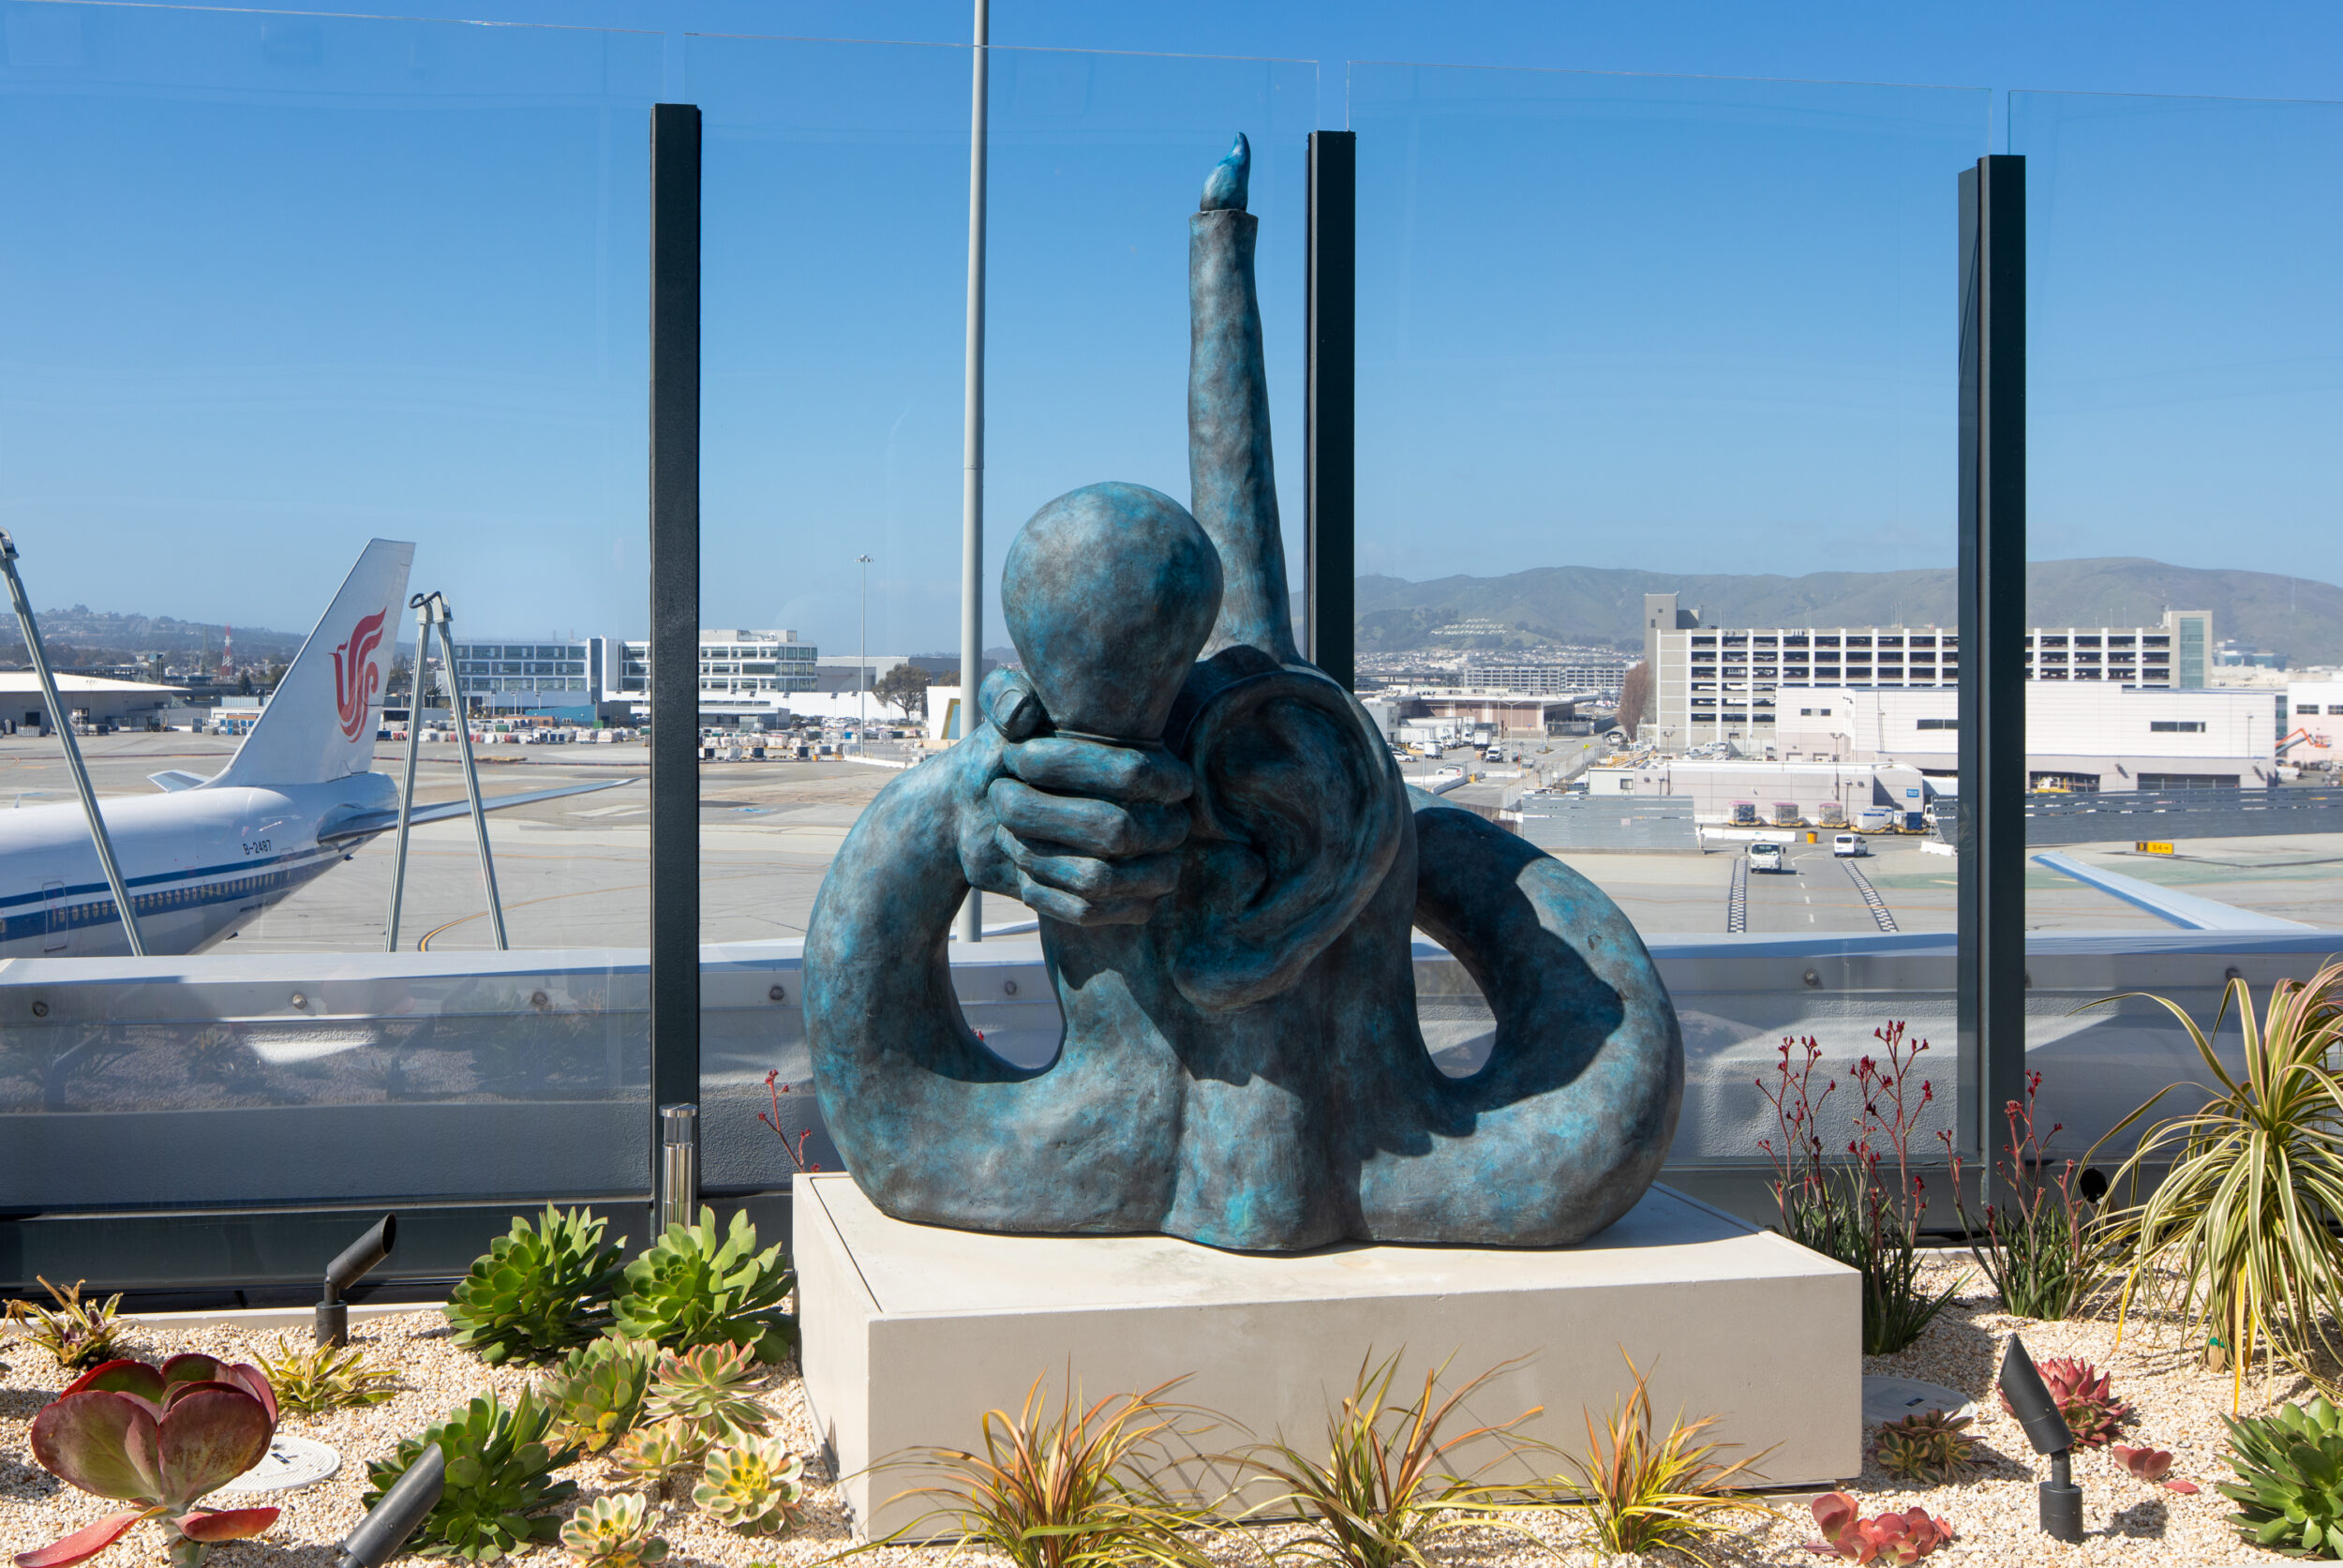 Interesting pieces and places to see or visit in San Francisco’s public art collection.